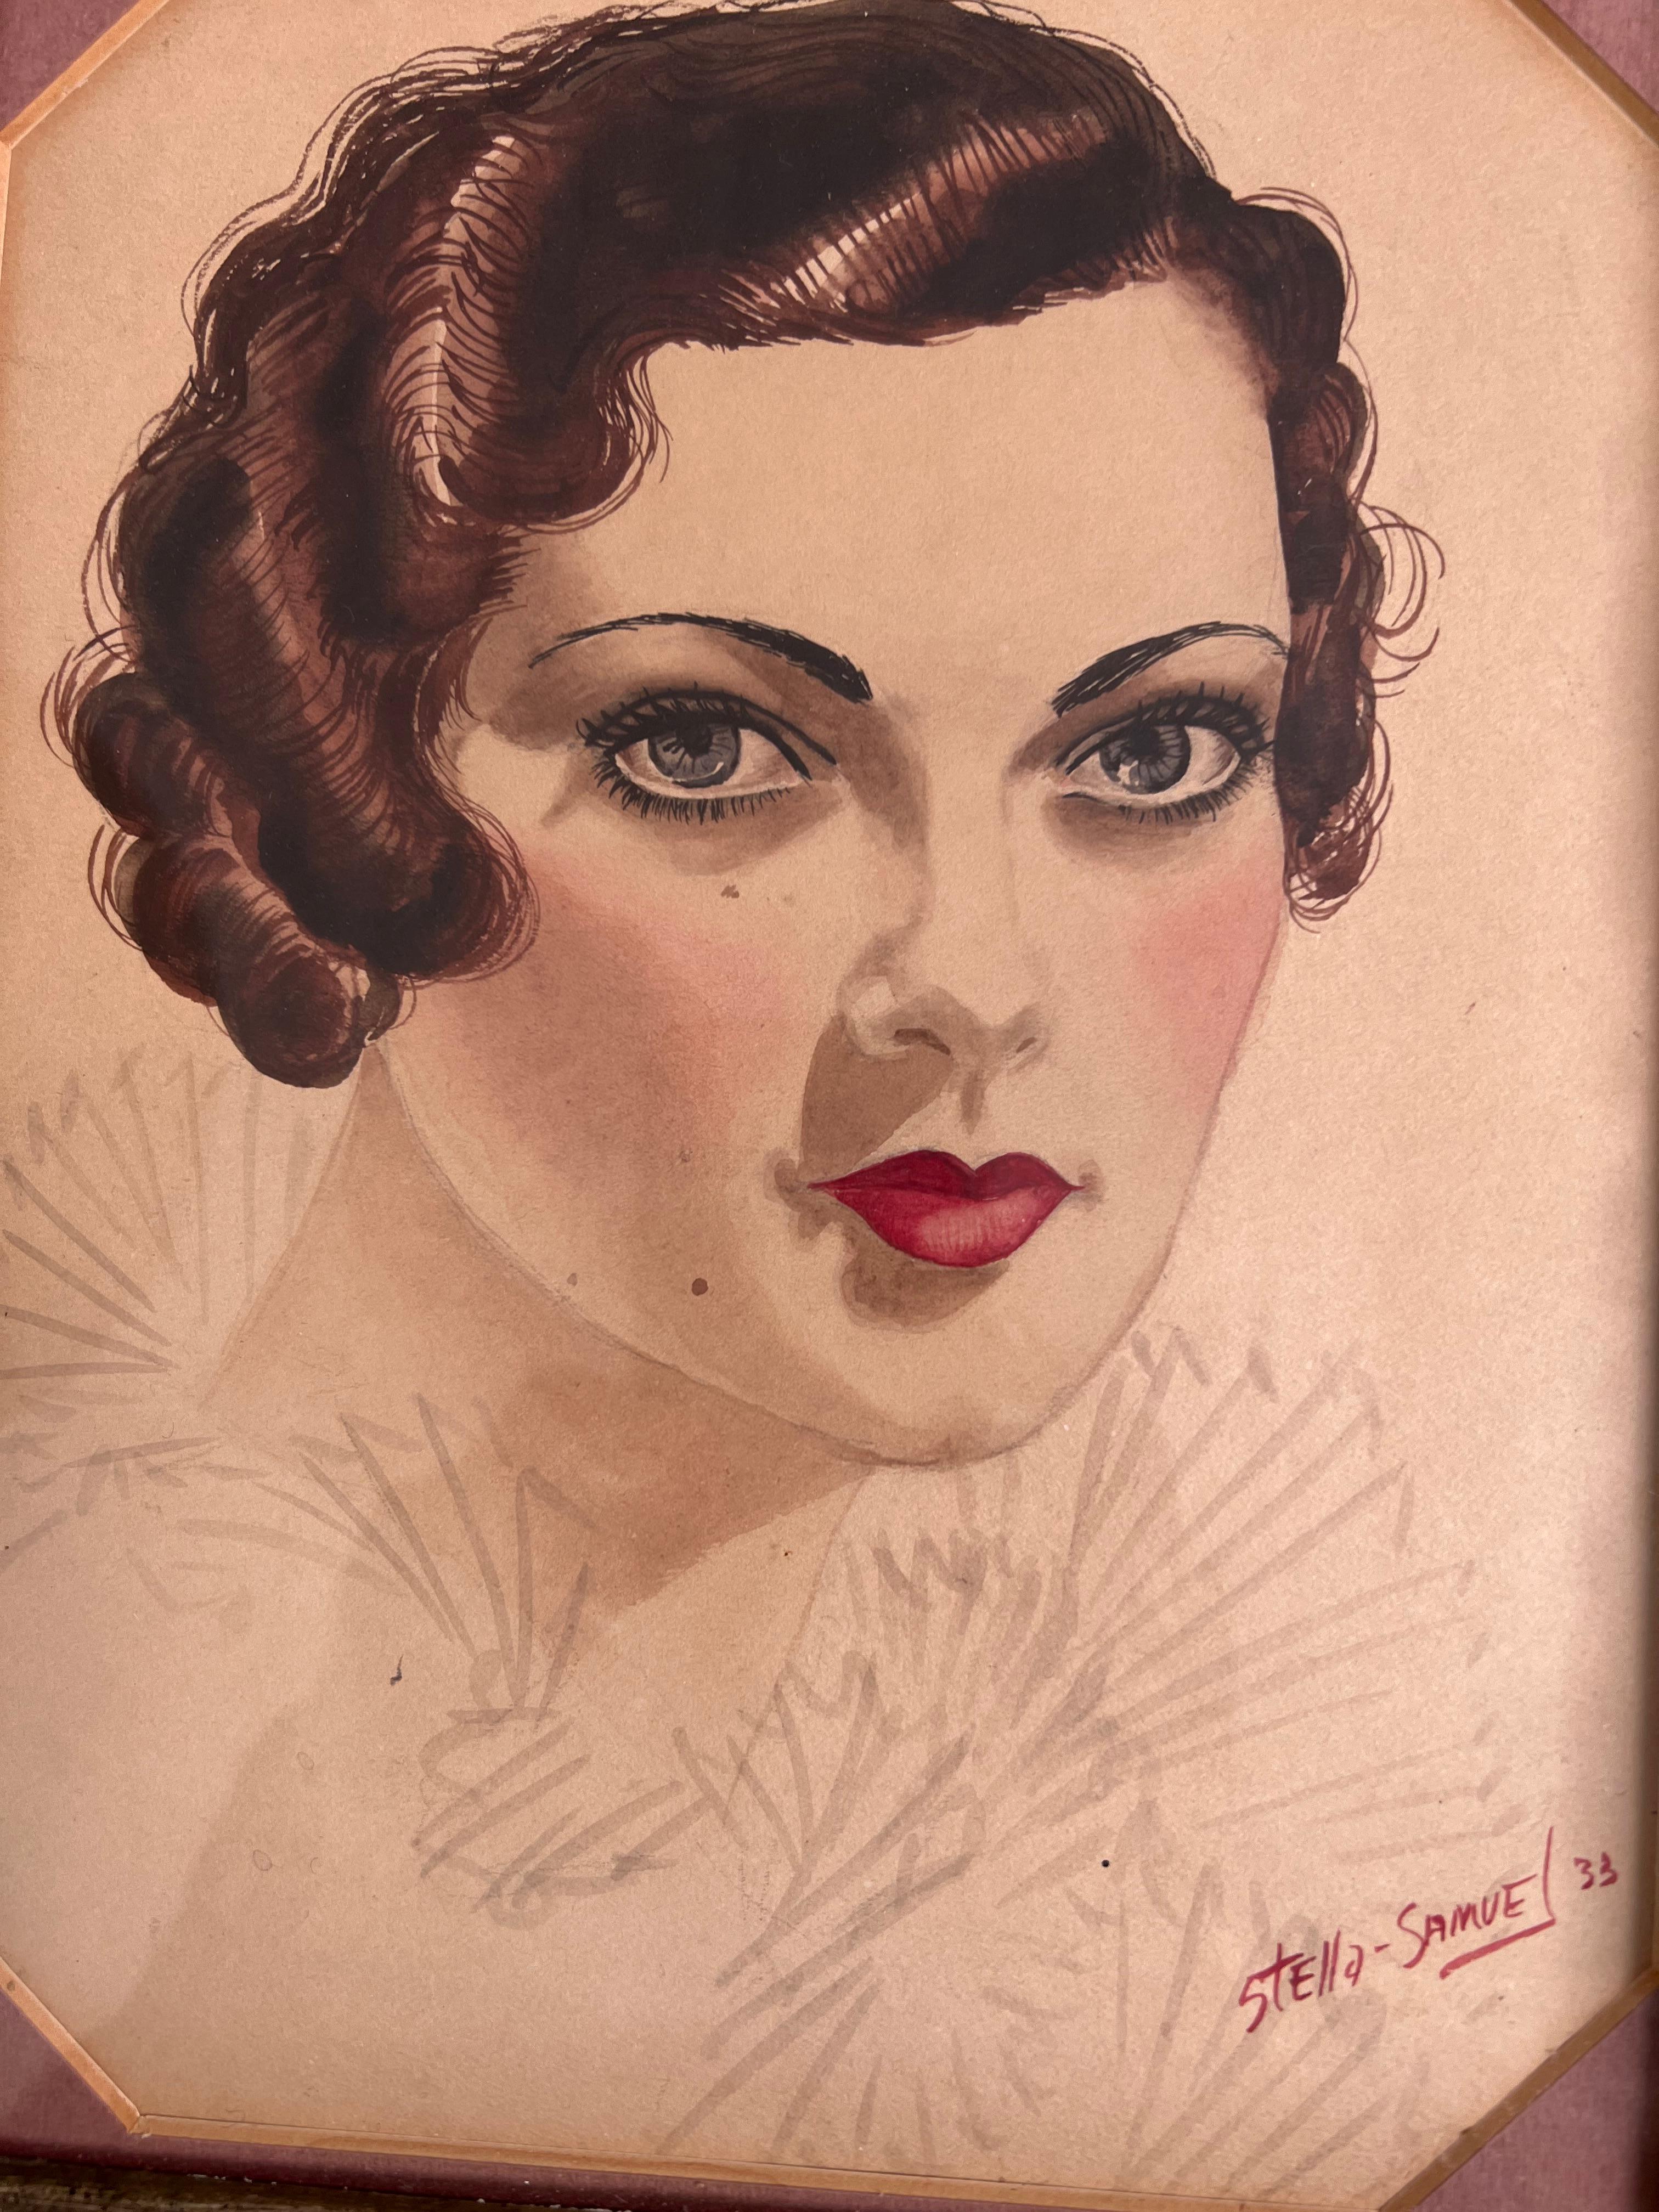 Pastel Portrait of Stella Samuel in the style of Charles Sheldon for Photoplay - Art by Unknown